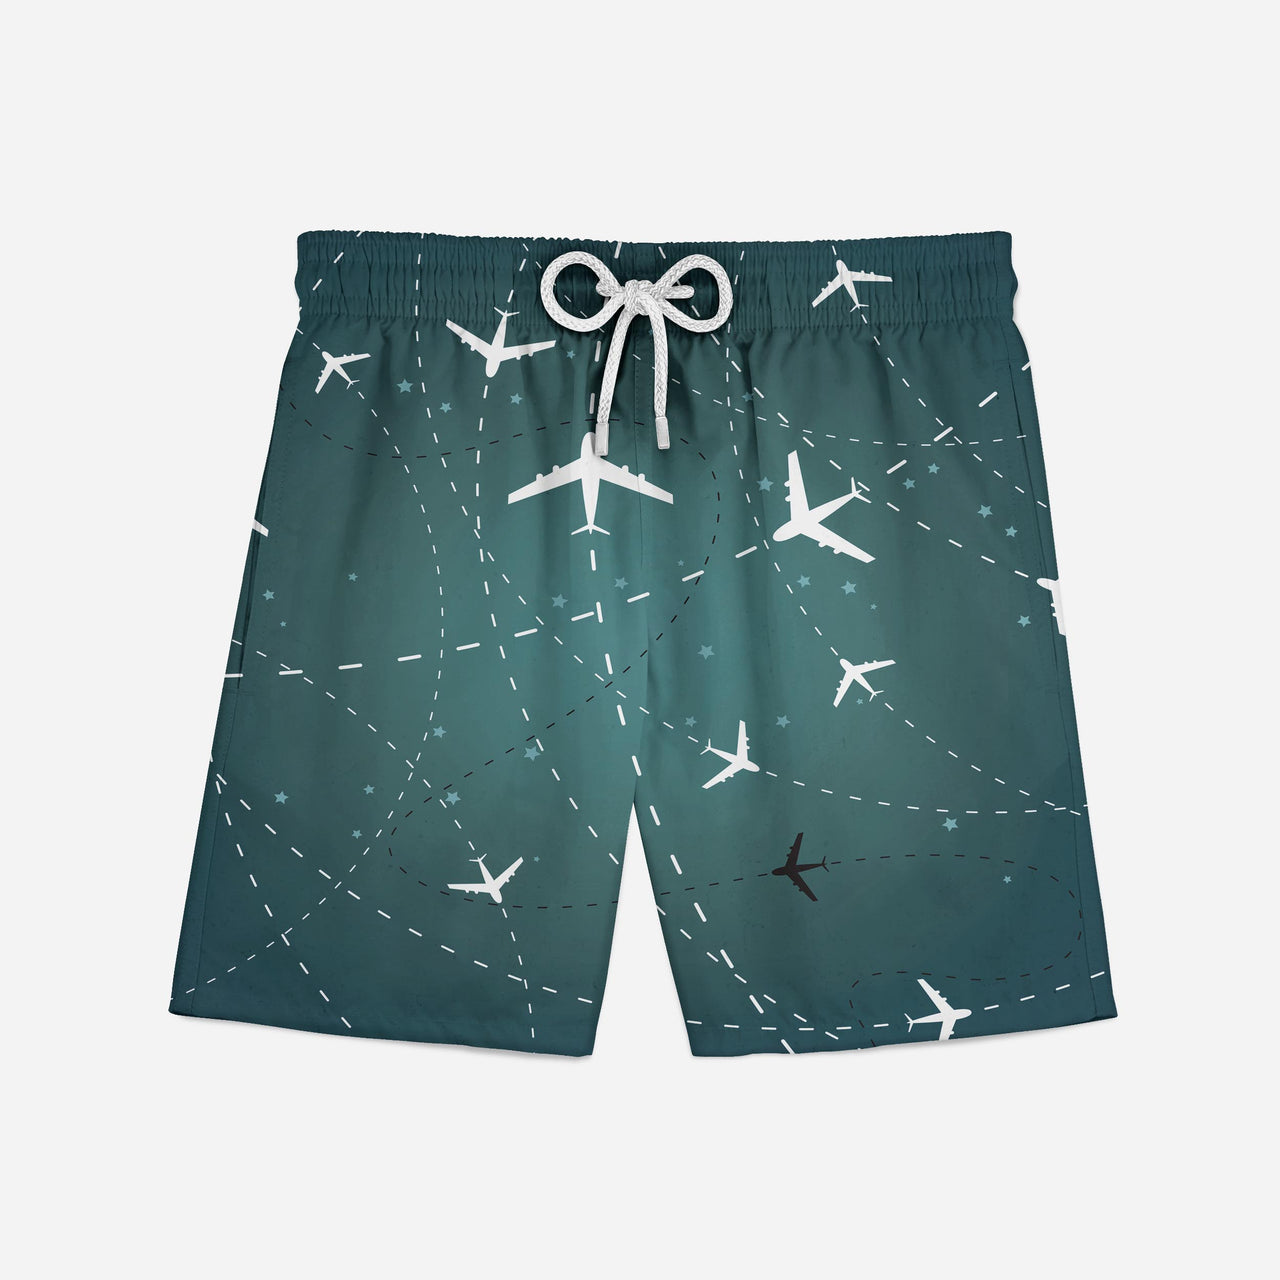 Travelling with Aircraft (Green) Designed Swim Trunks & Shorts